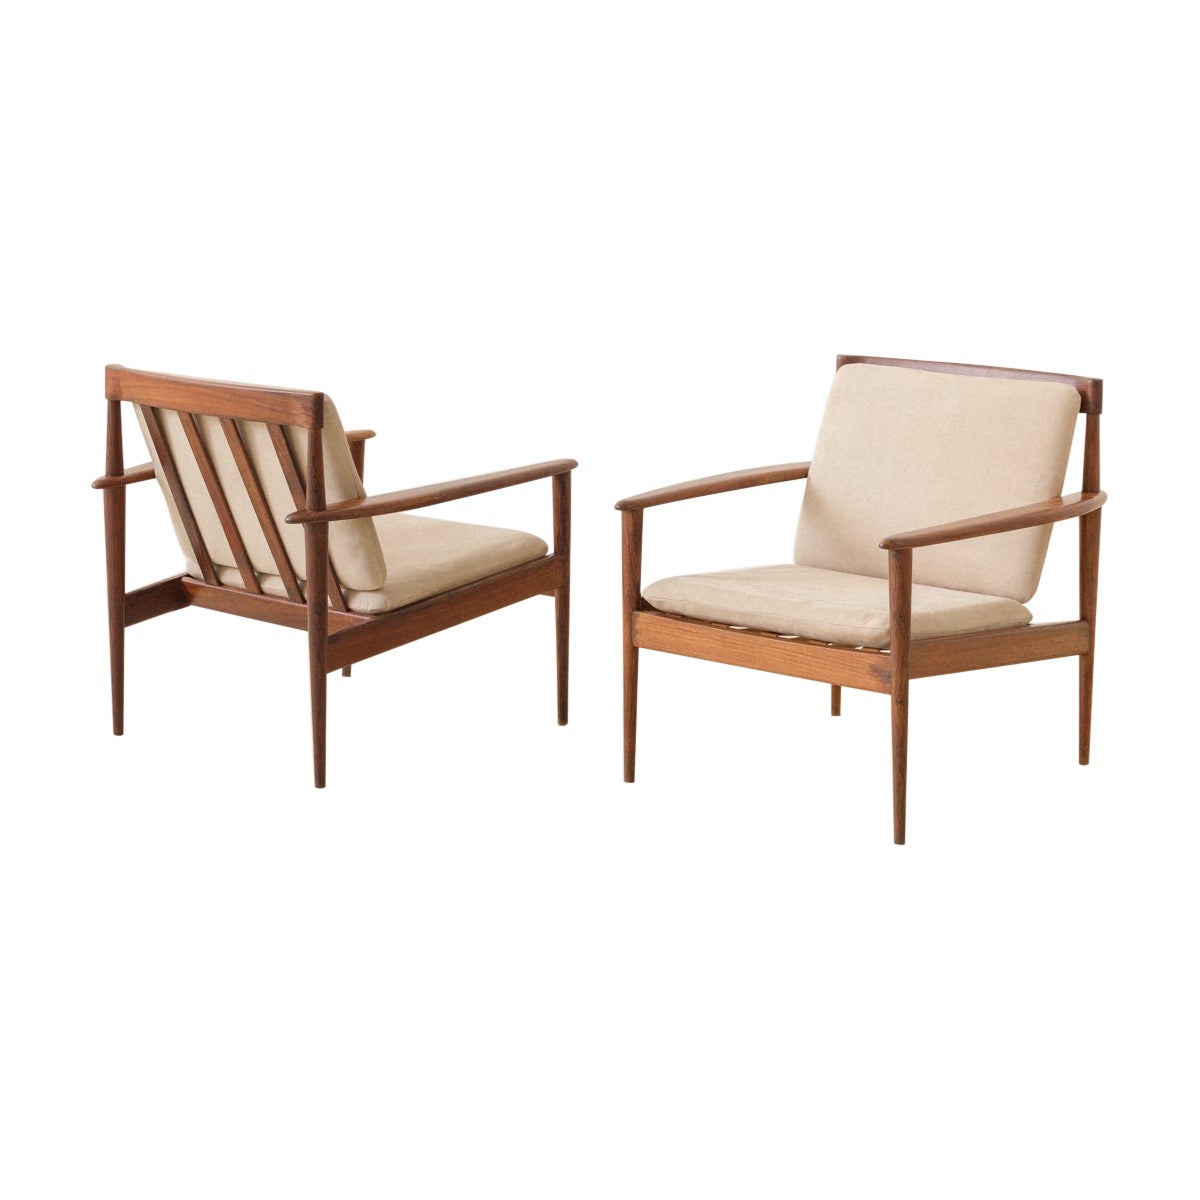 Pair of Armchairs by Grete Jalk/Rino Levi, c. 1951, Brazilian Midcentury Design For Sale